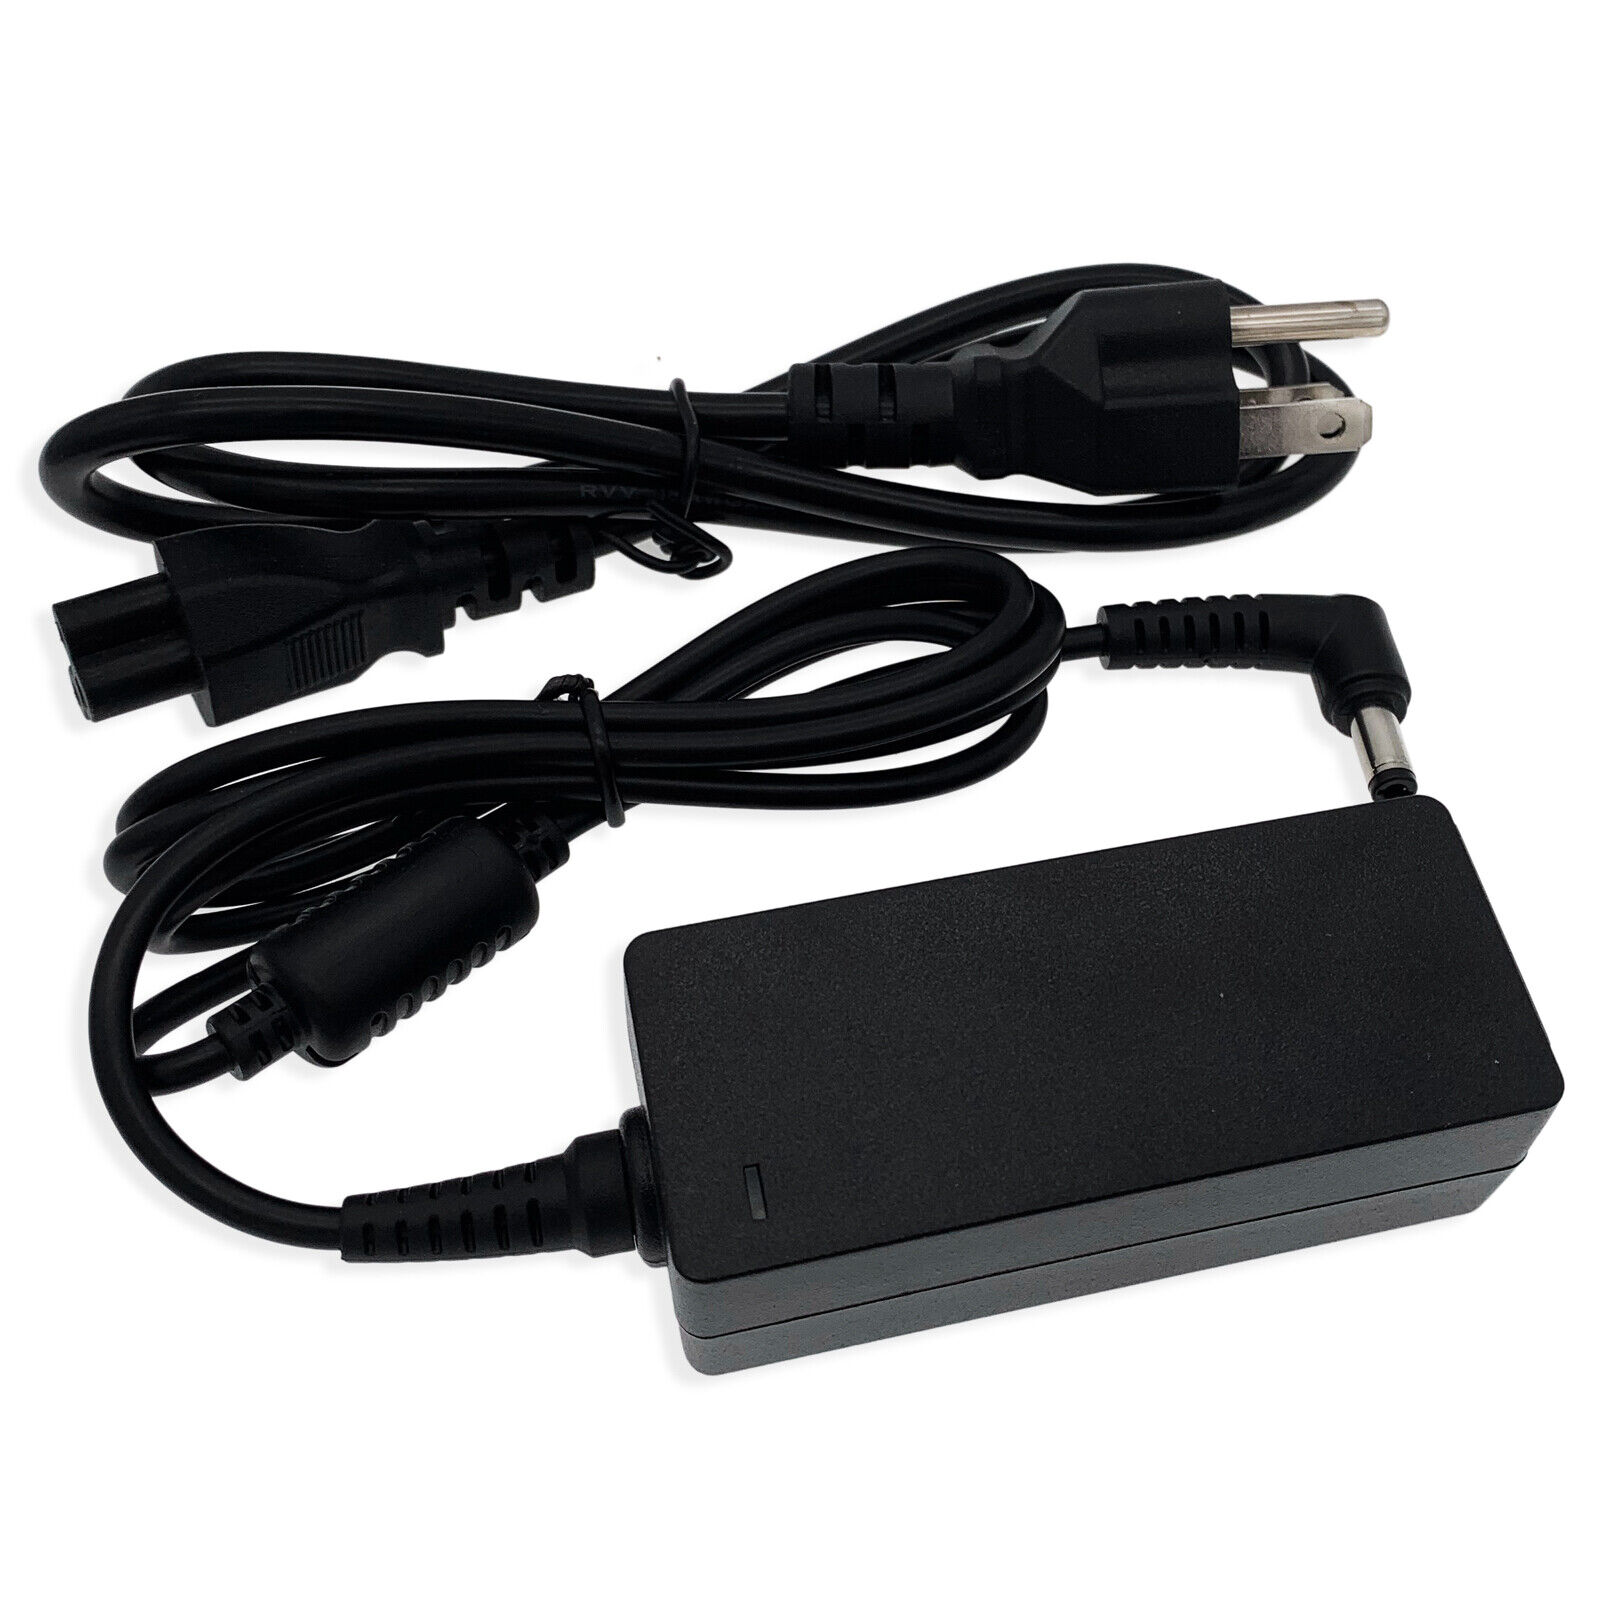 *Brand NEW* Canon Pixma IP90 I80 I70 IP100 PRINTER AC ADAPTER CHARGER SUPPLY POWER CORD